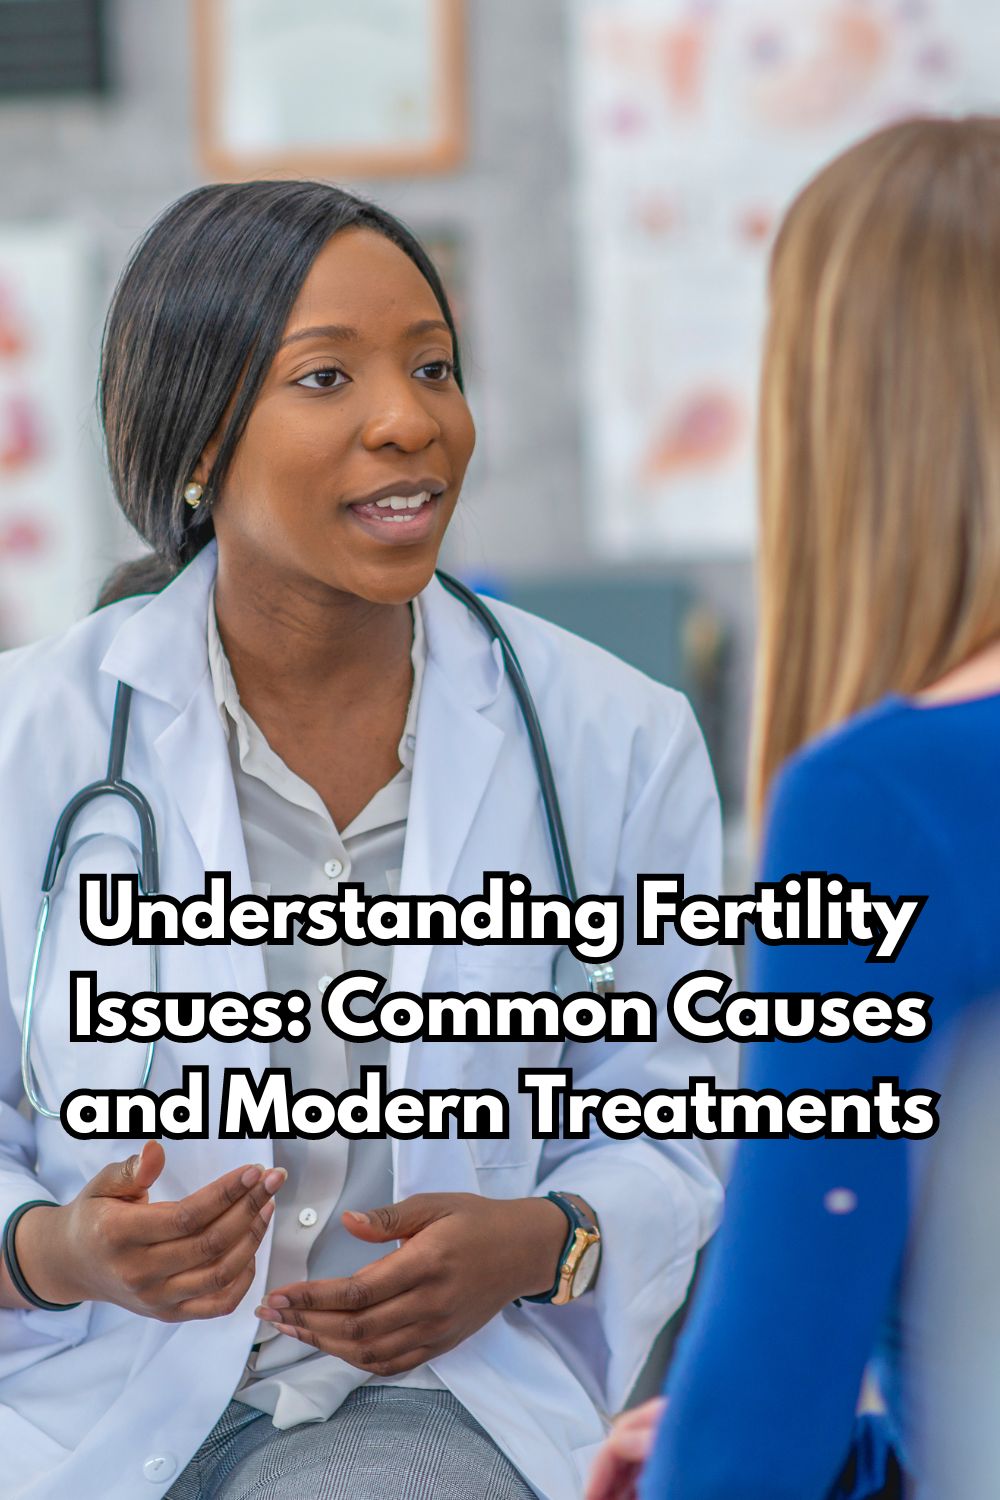 Understanding Fertility Issues: Common Causes and Modern Treatments